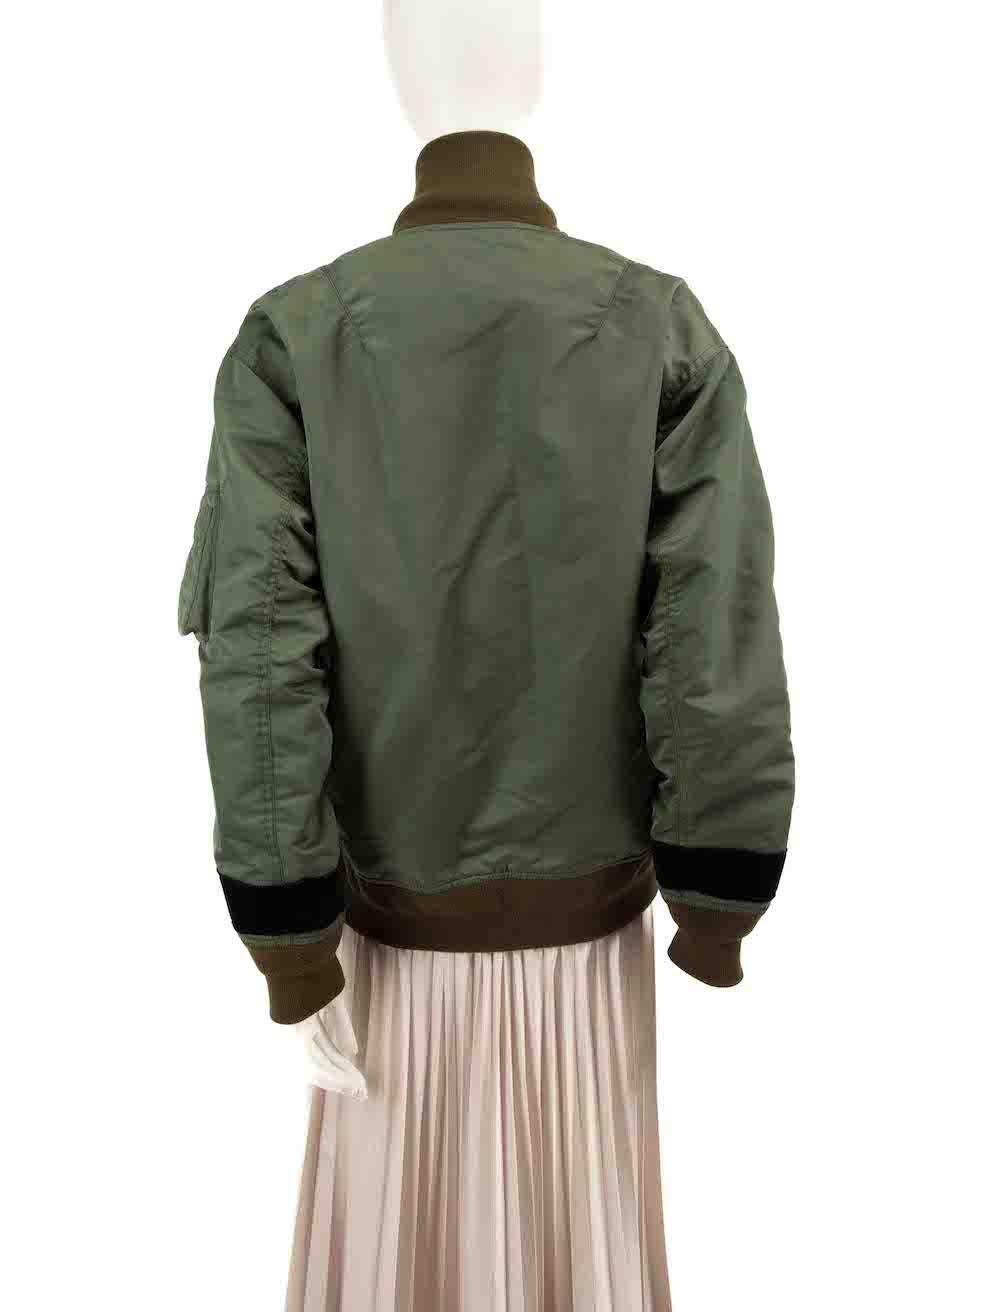 Sacai Khaki Zip Up Bomber Jacket Size M In Excellent Condition For Sale In London, GB